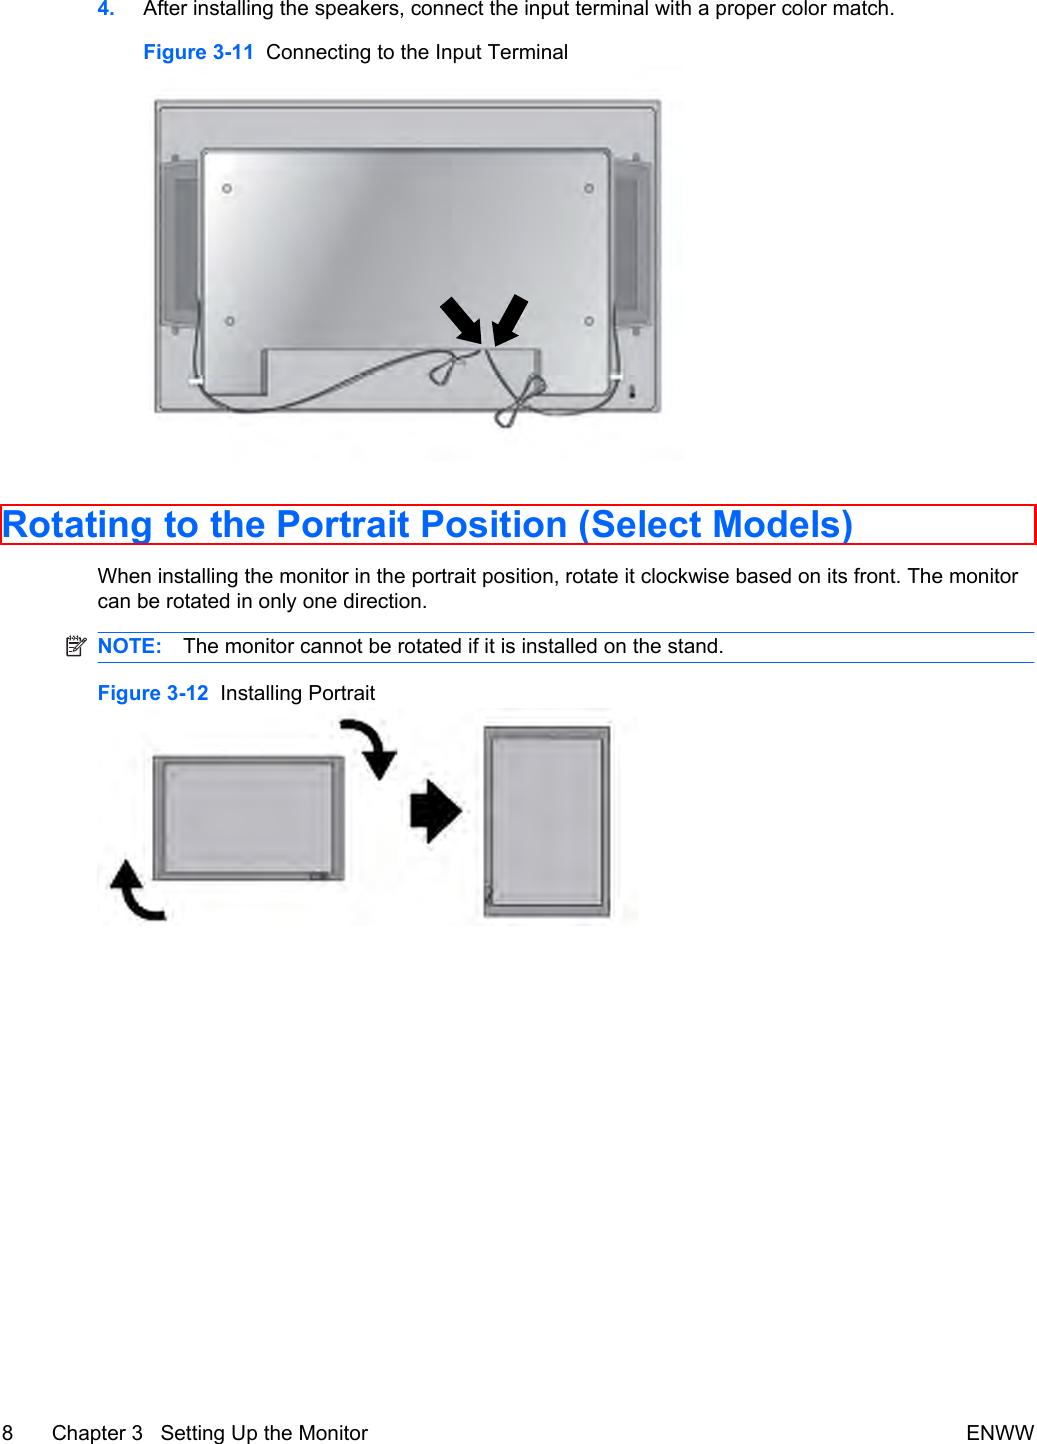 4. After installing the speakers, connect the input terminal with a proper color match.Figure 3-11  Connecting to the Input TerminalRotating to the Portrait Position (Select Models)When installing the monitor in the portrait position, rotate it clockwise based on its front. The monitorcan be rotated in only one direction.NOTE: The monitor cannot be rotated if it is installed on the stand.Figure 3-12  Installing Portrait8 Chapter 3   Setting Up the Monitor ENWW